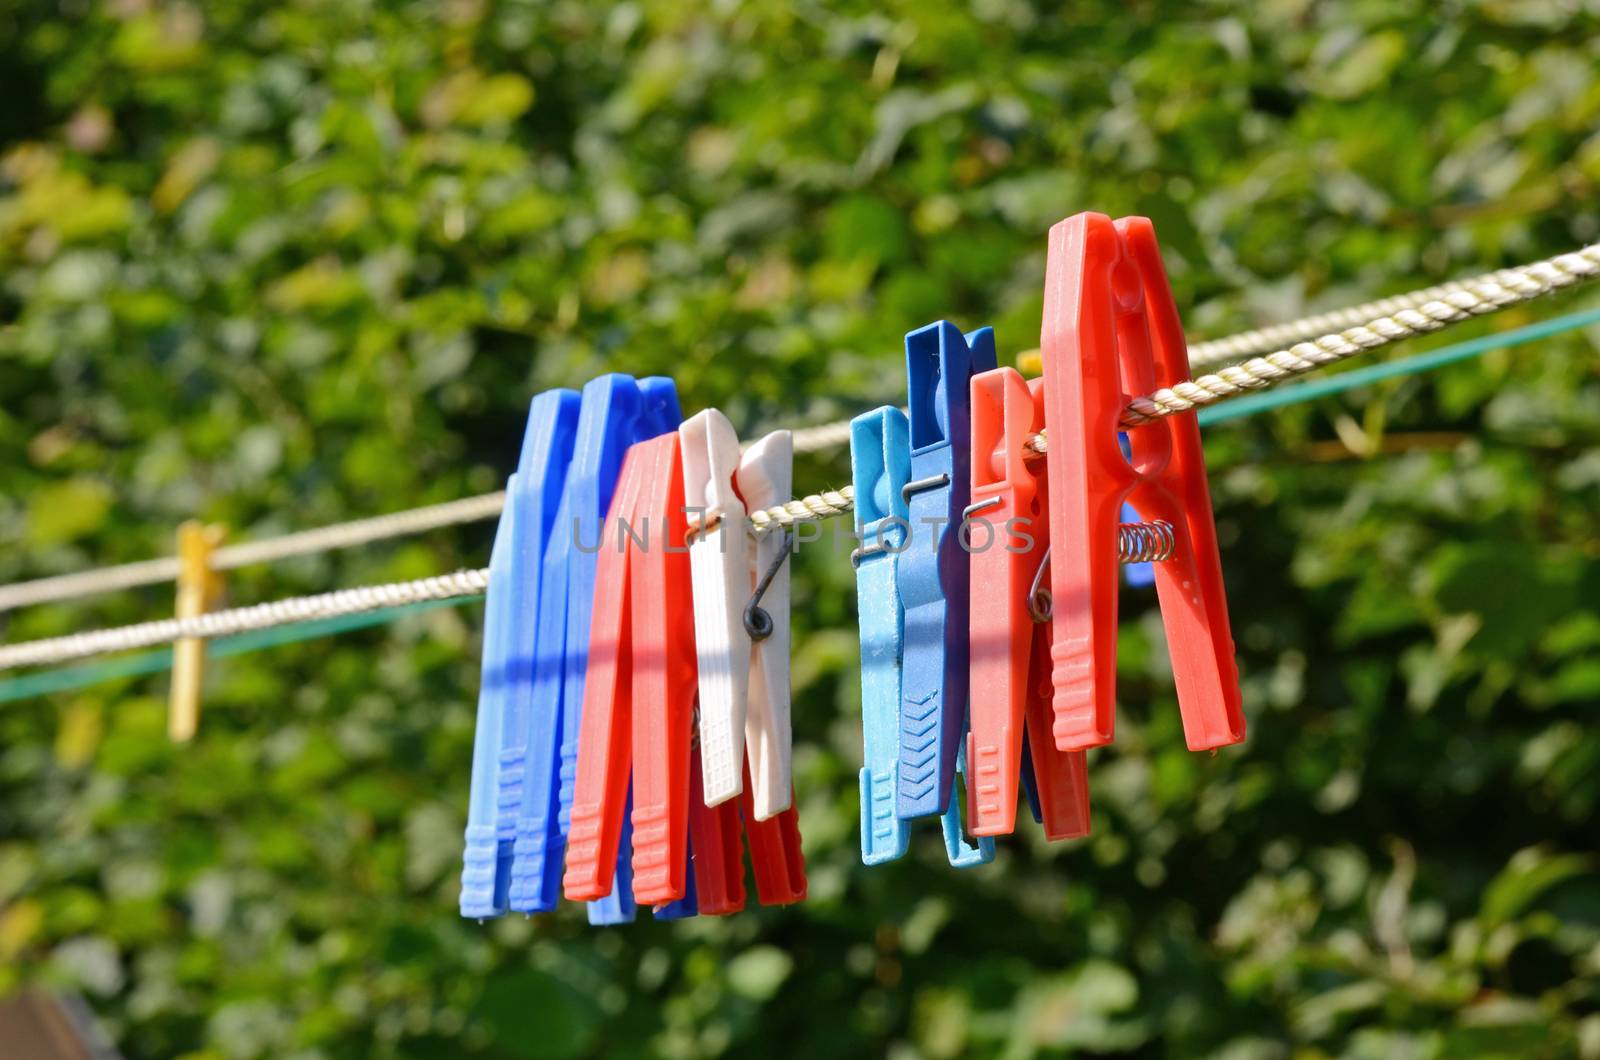 clothes pegs, laundry pins by sarkao